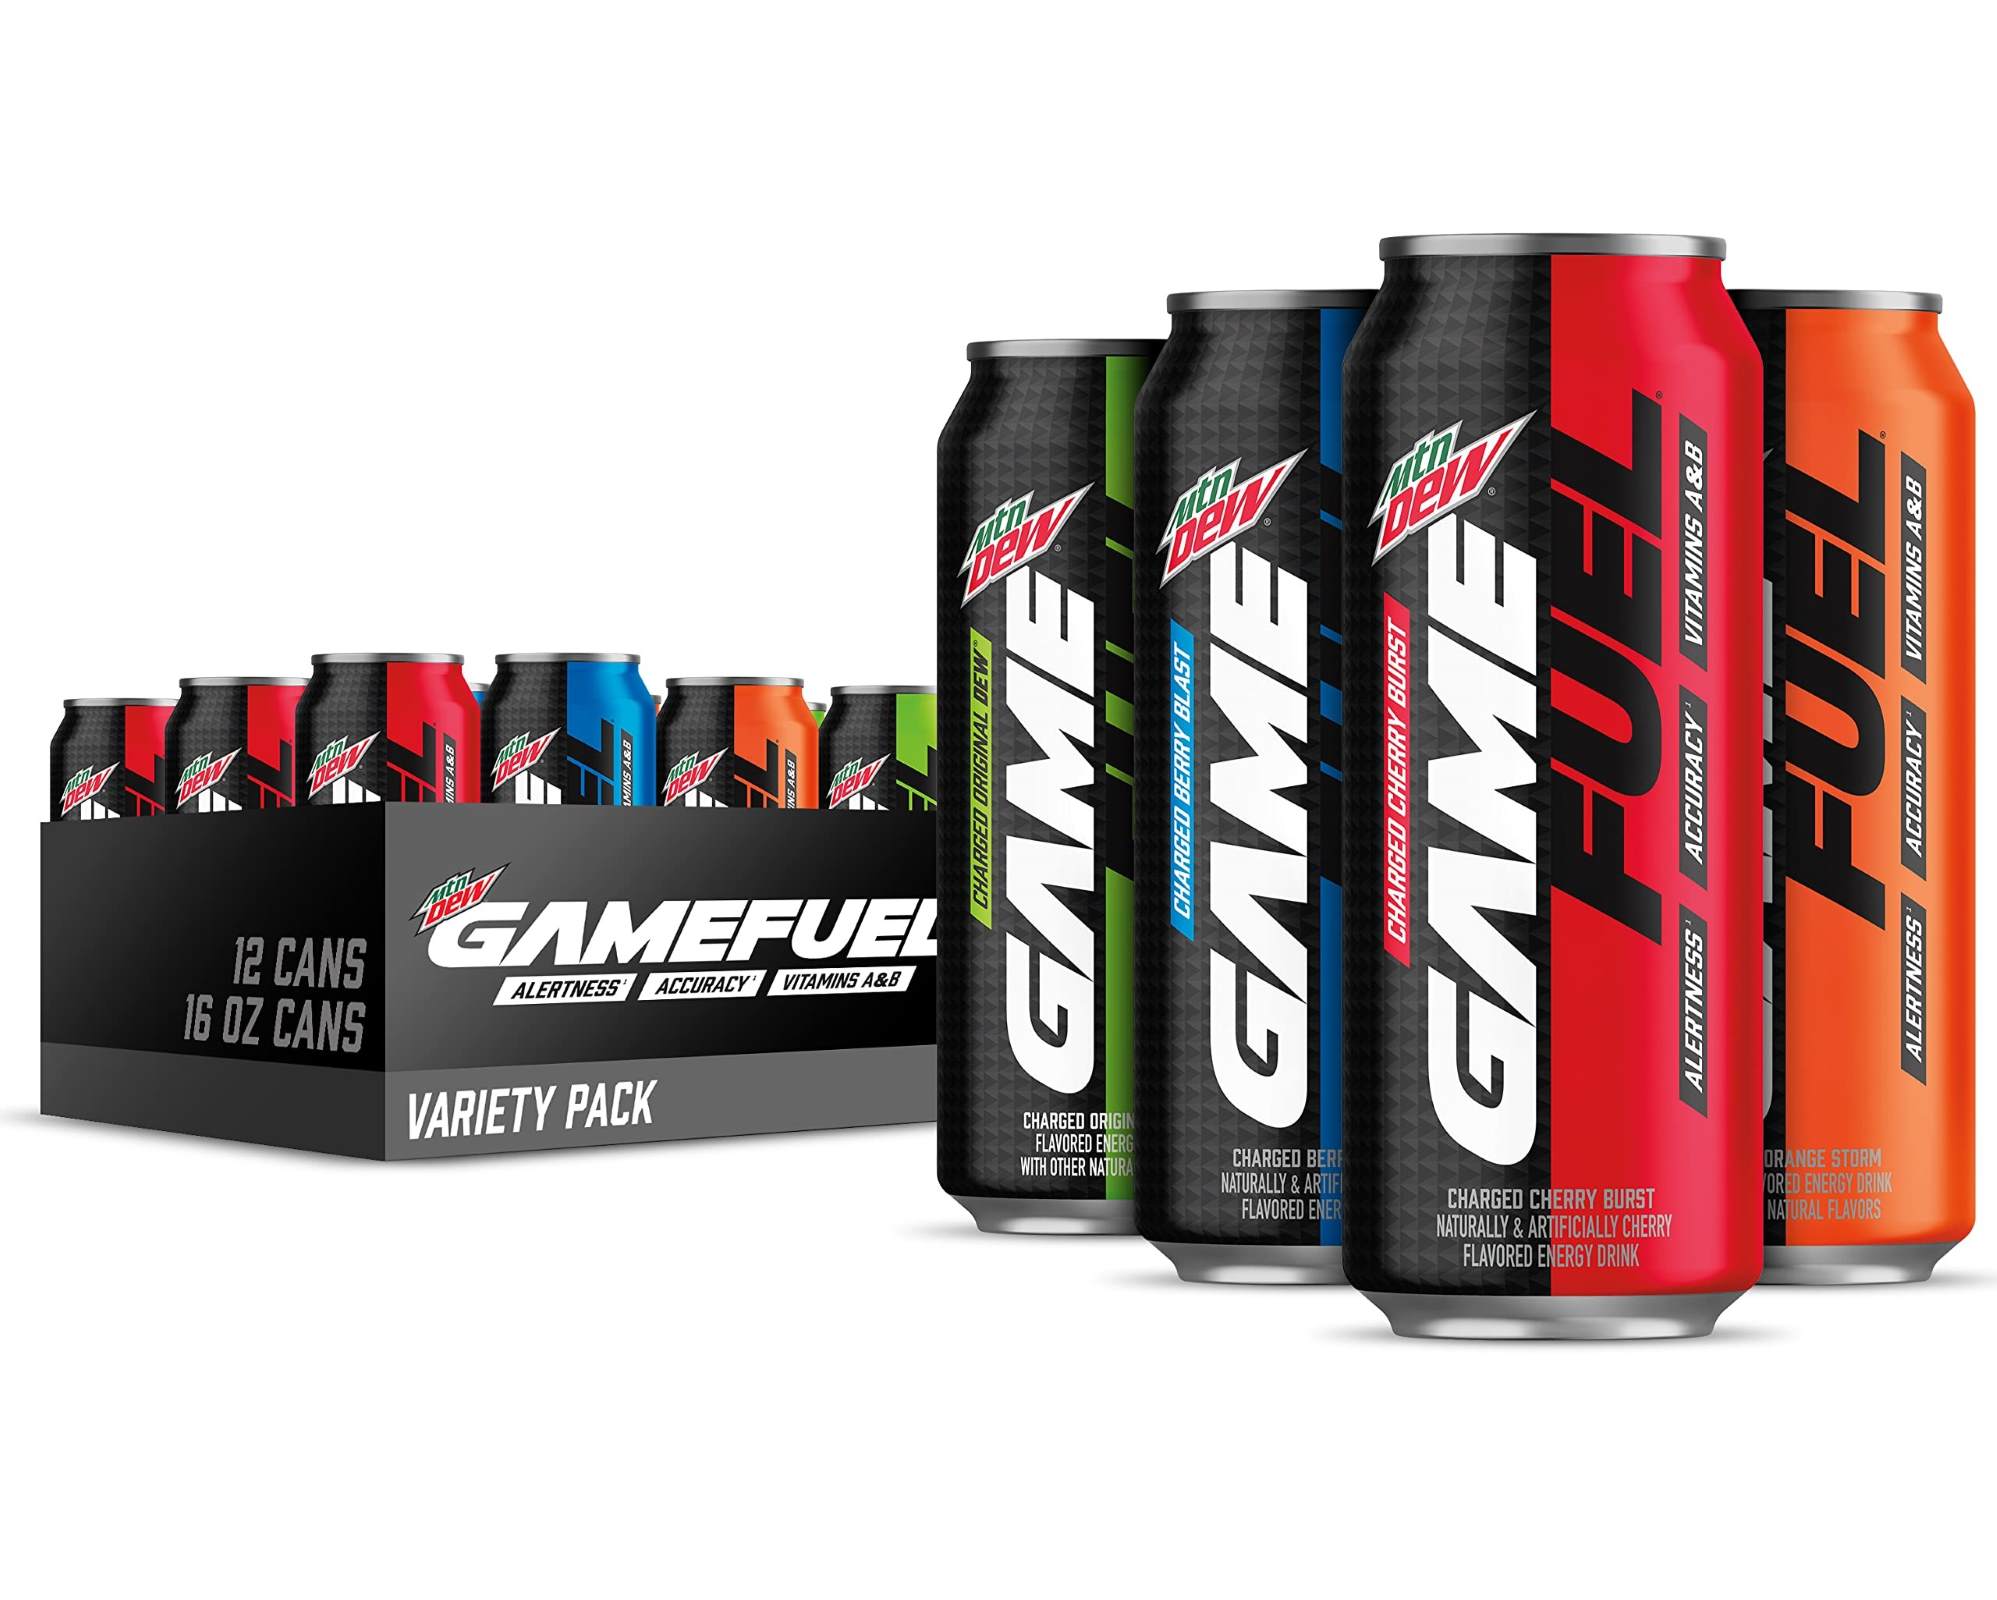 https://facts.net/wp-content/uploads/2023/11/19-game-fuel-nutrition-facts-1700927778.jpg